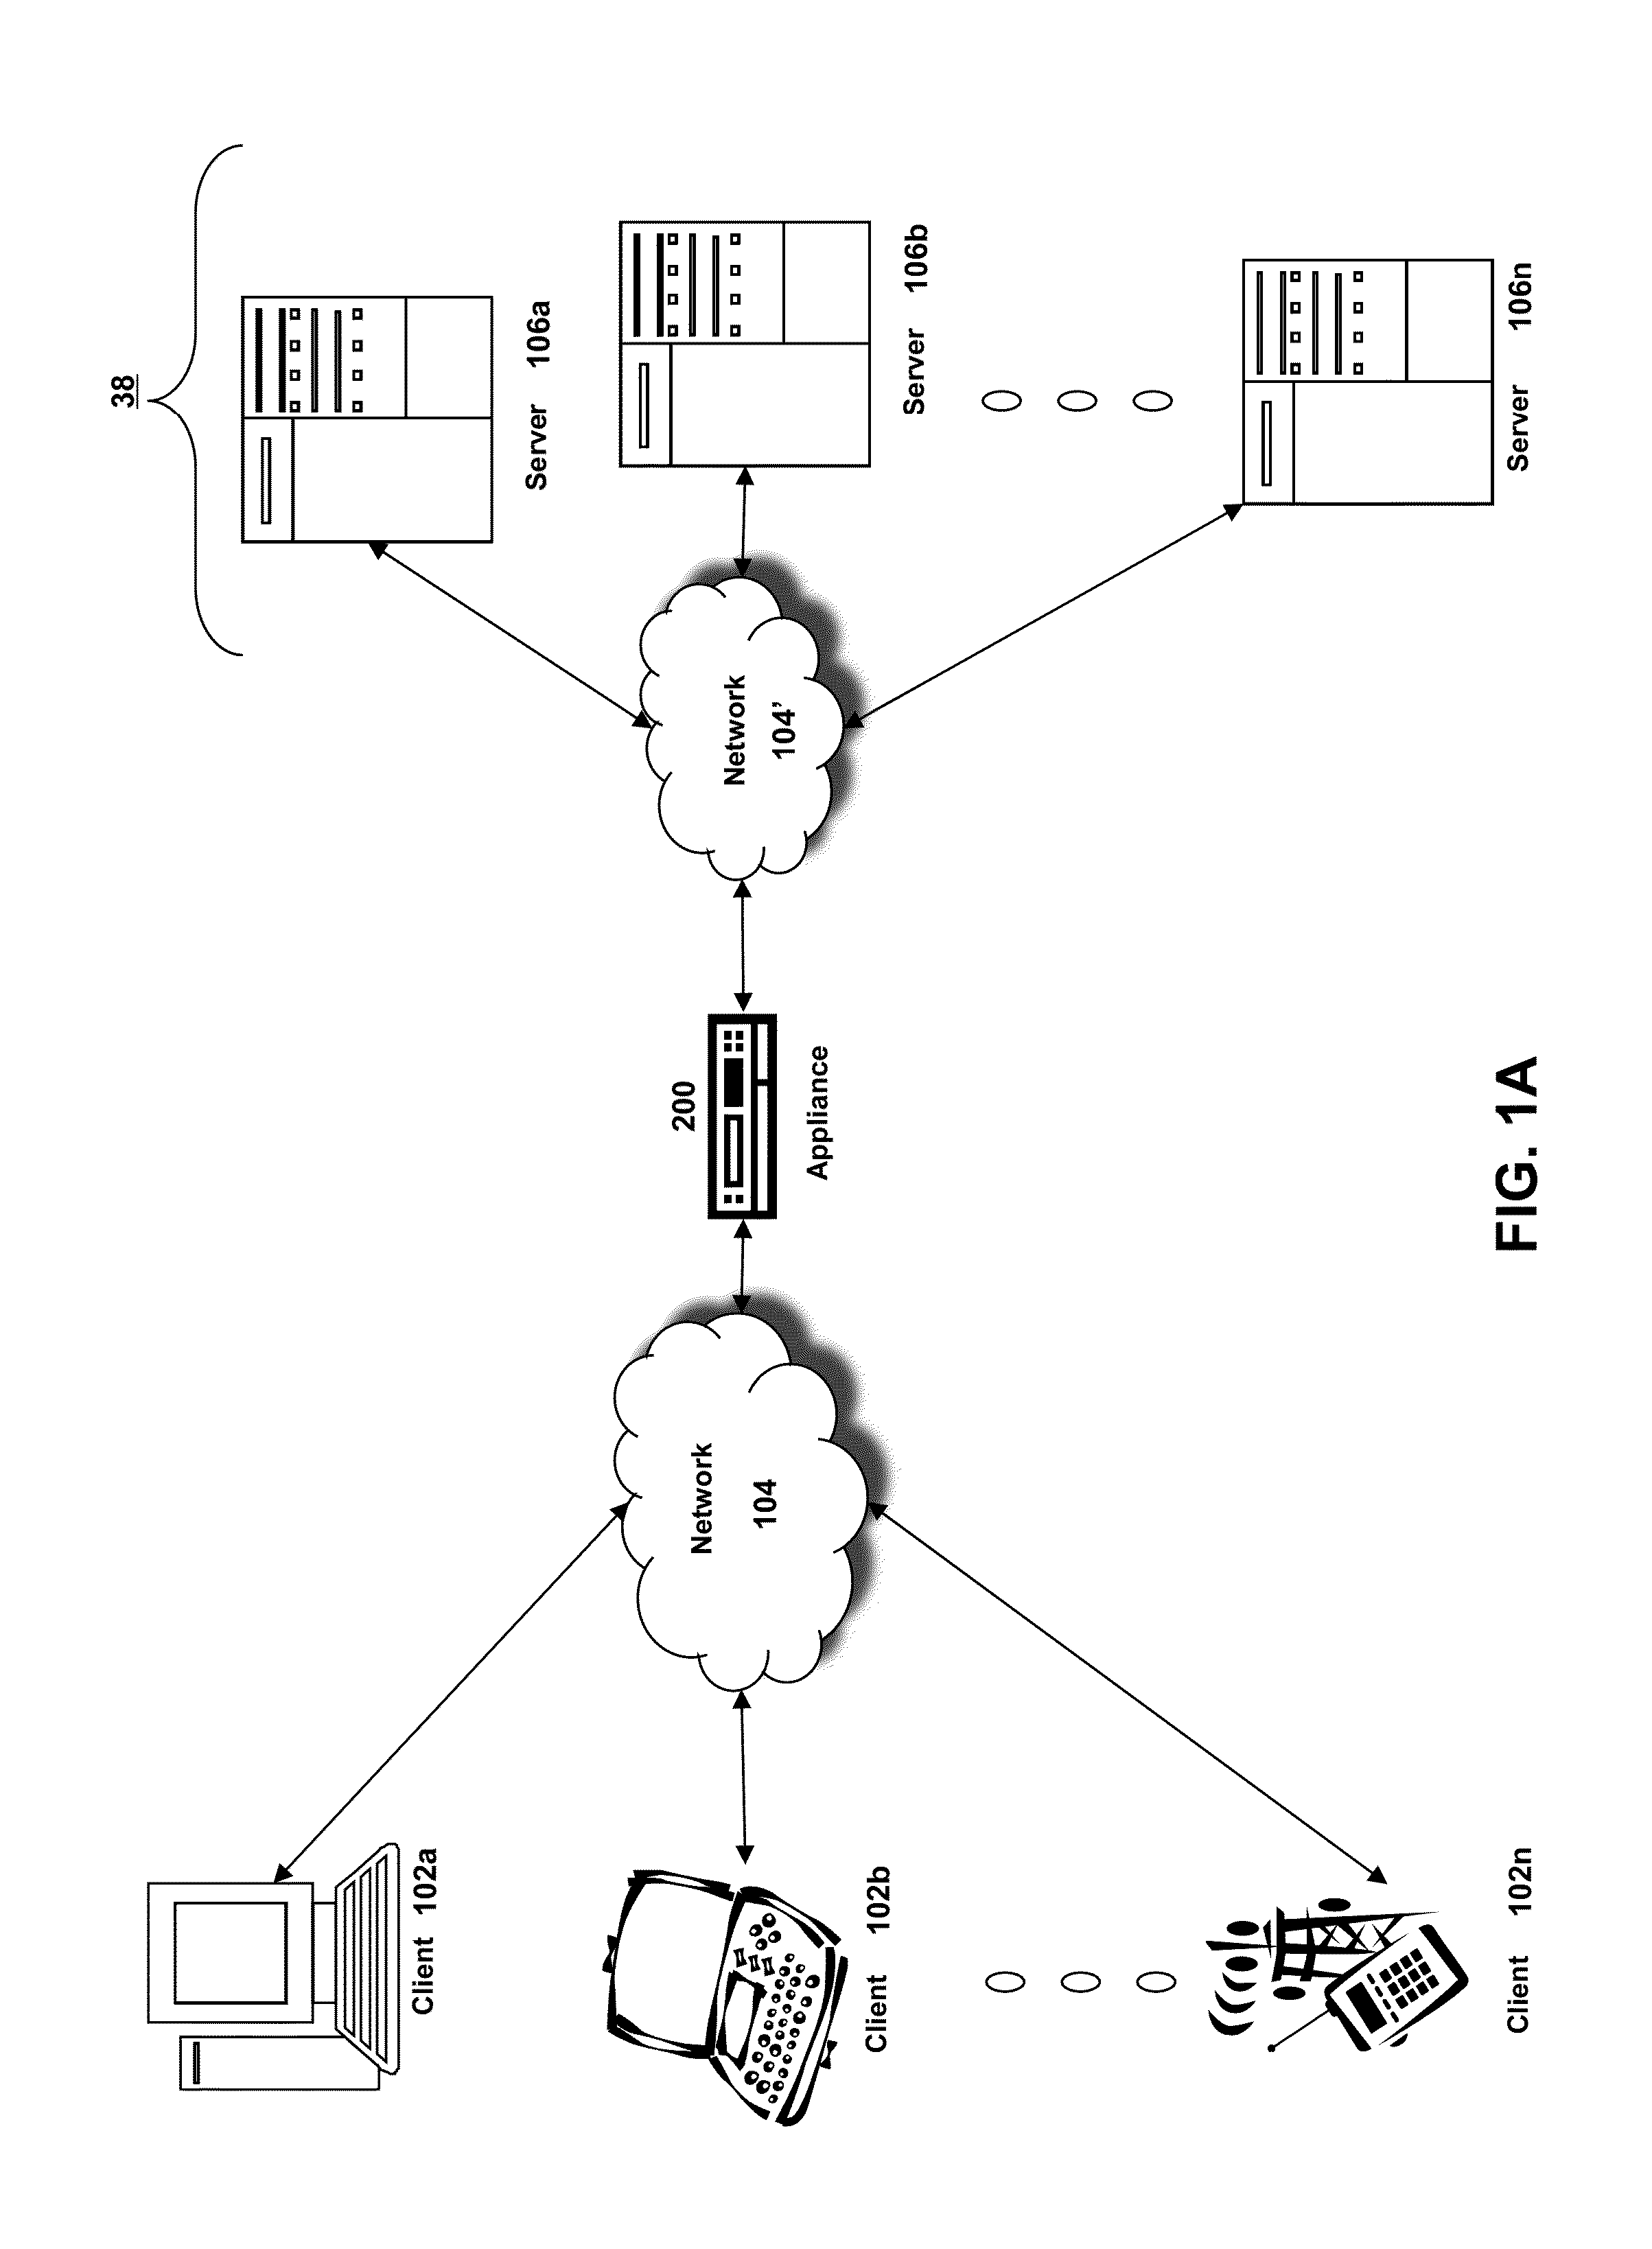 Systems and methods for performing single sign-on by an intermediary device for a remote desktop session of a client